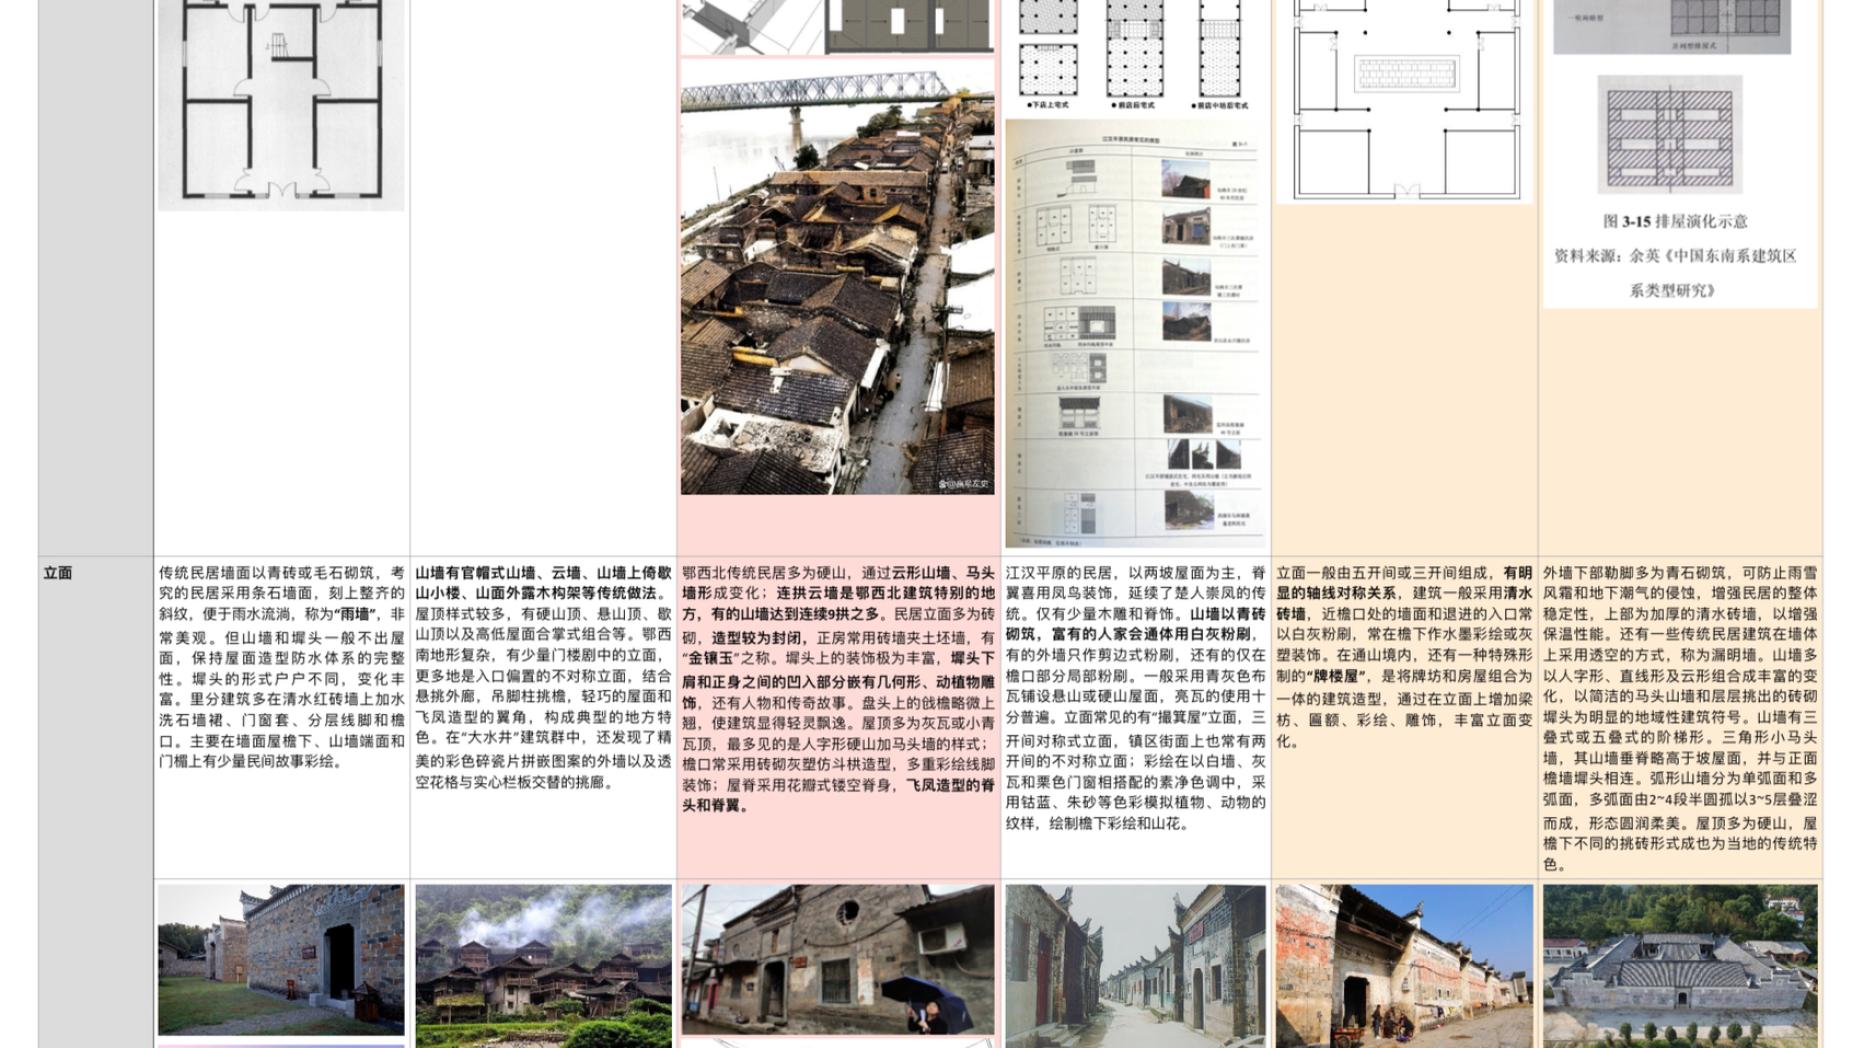 The comparative study of Hubei architecture style